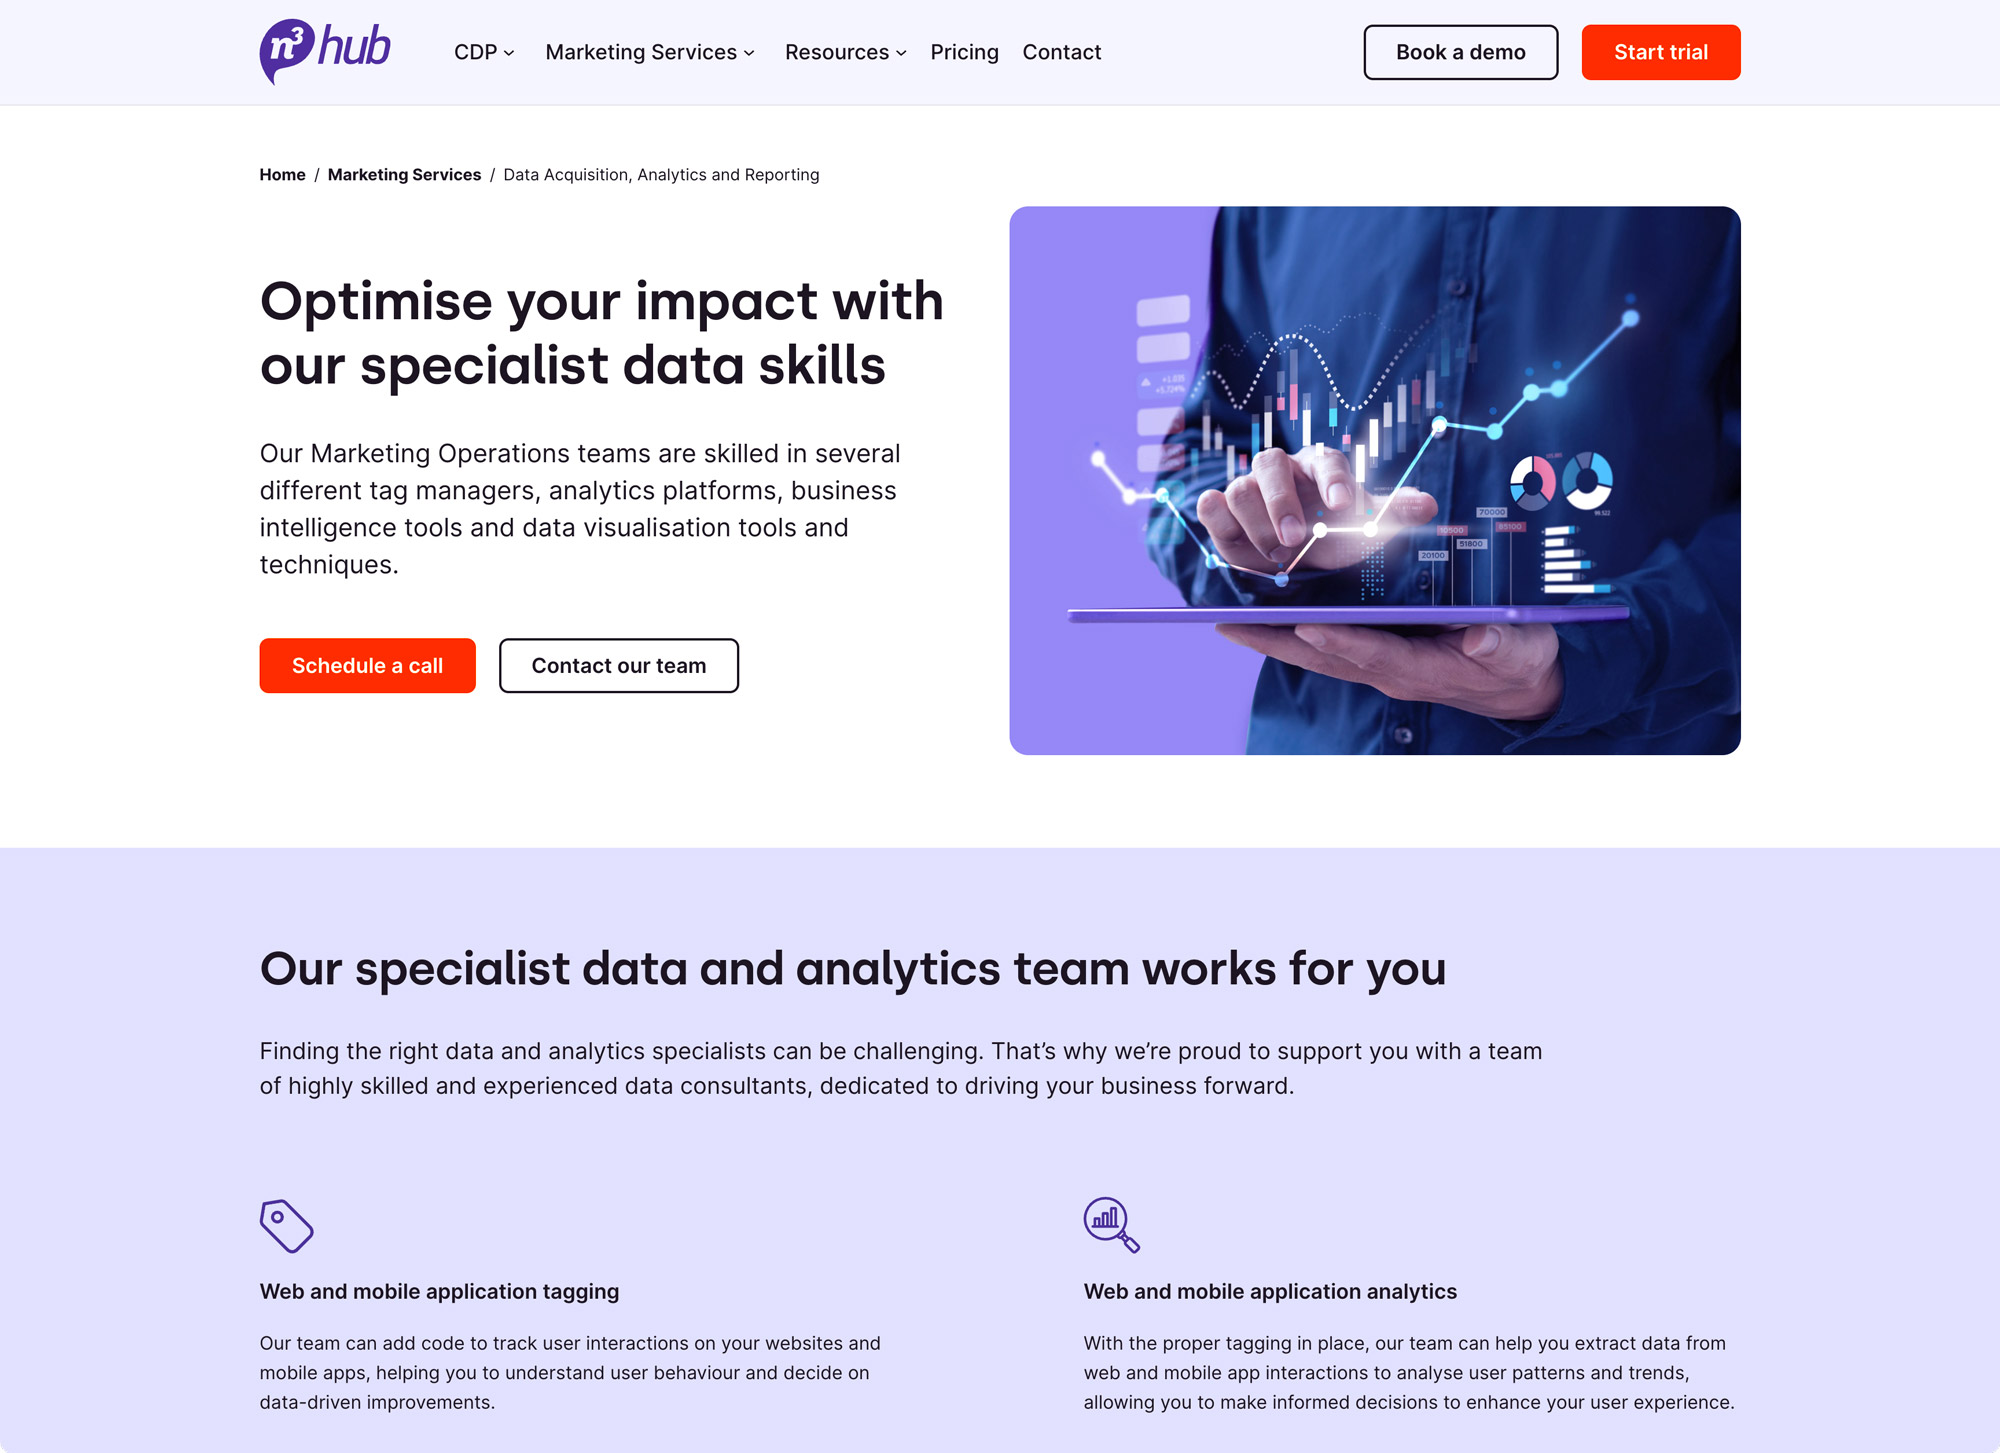 Screenshot of the n3 Hub website, showing a page about Data Acquisition, Analytics and Reporting